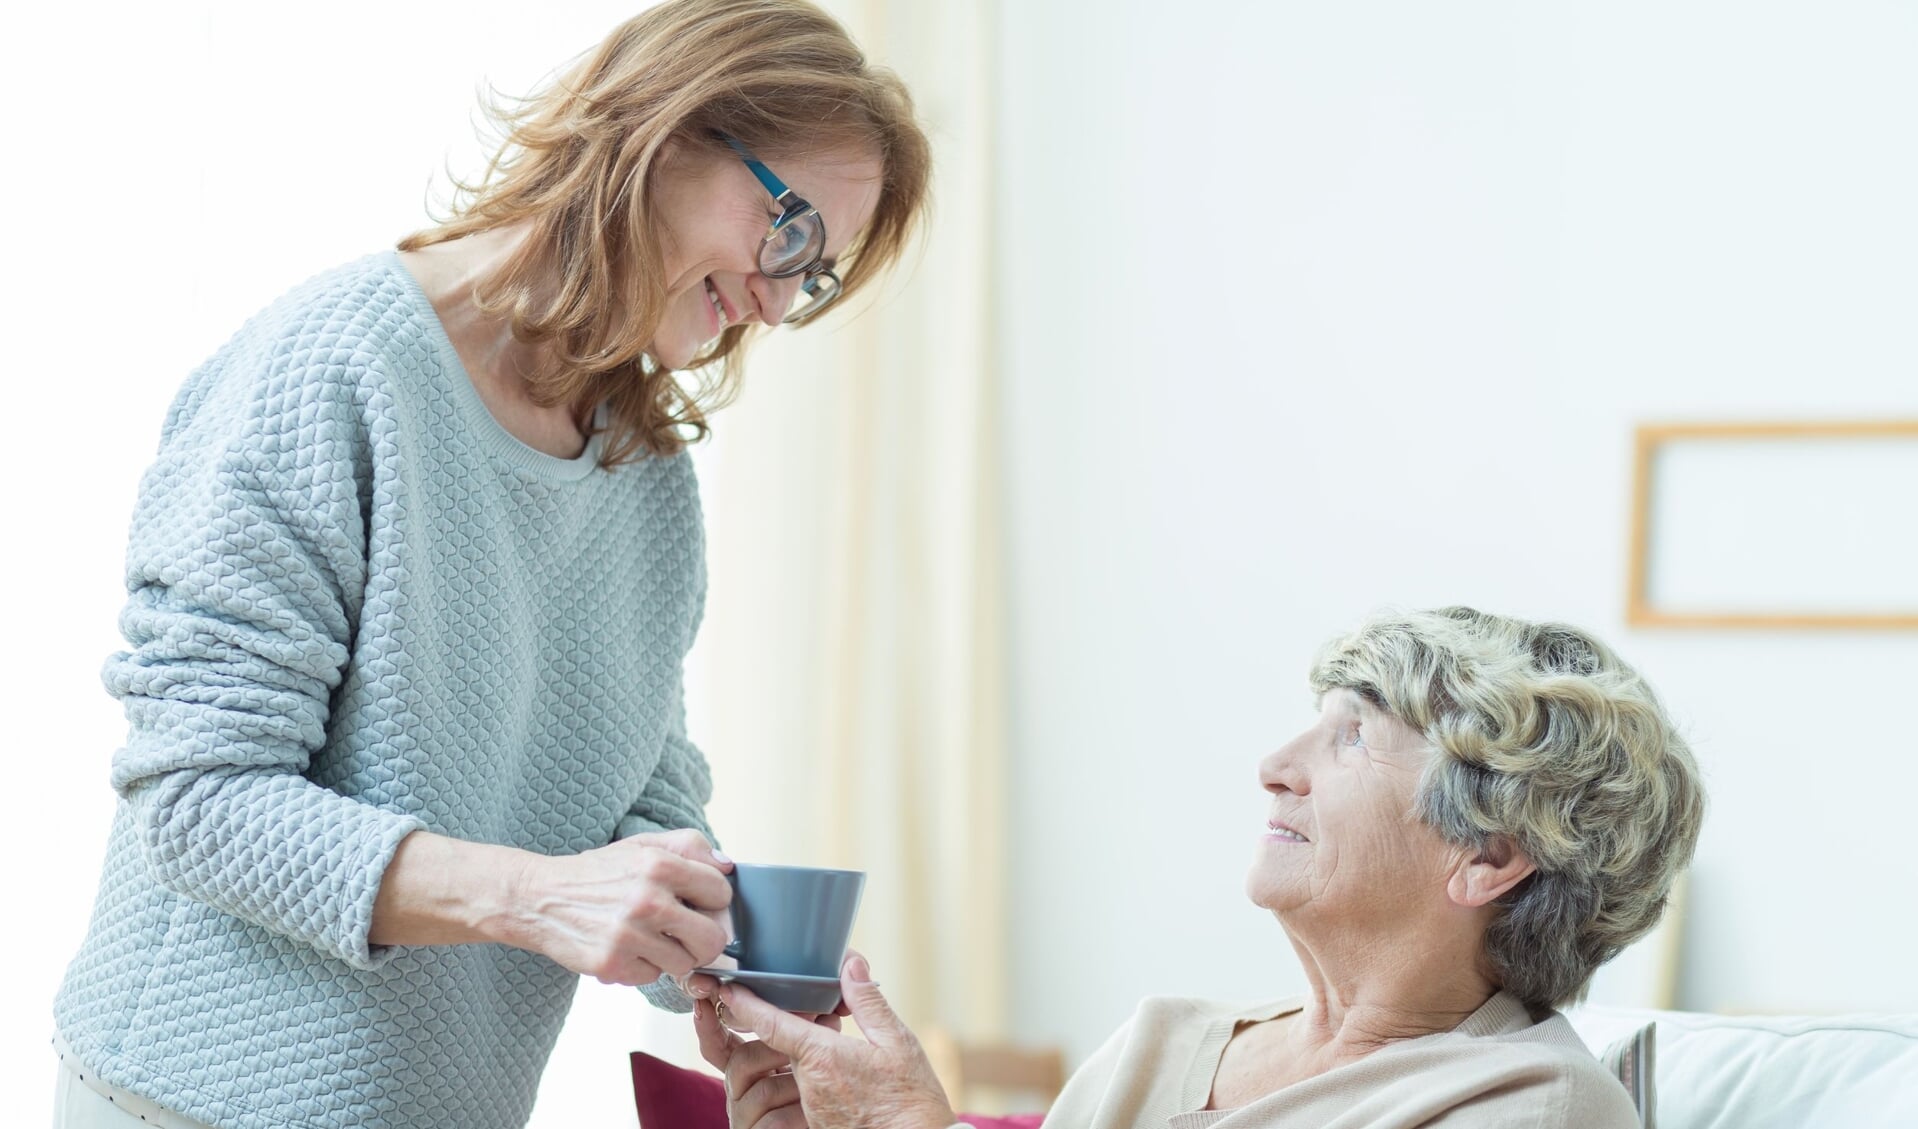 Smiling senior care assistant helping elderly lady